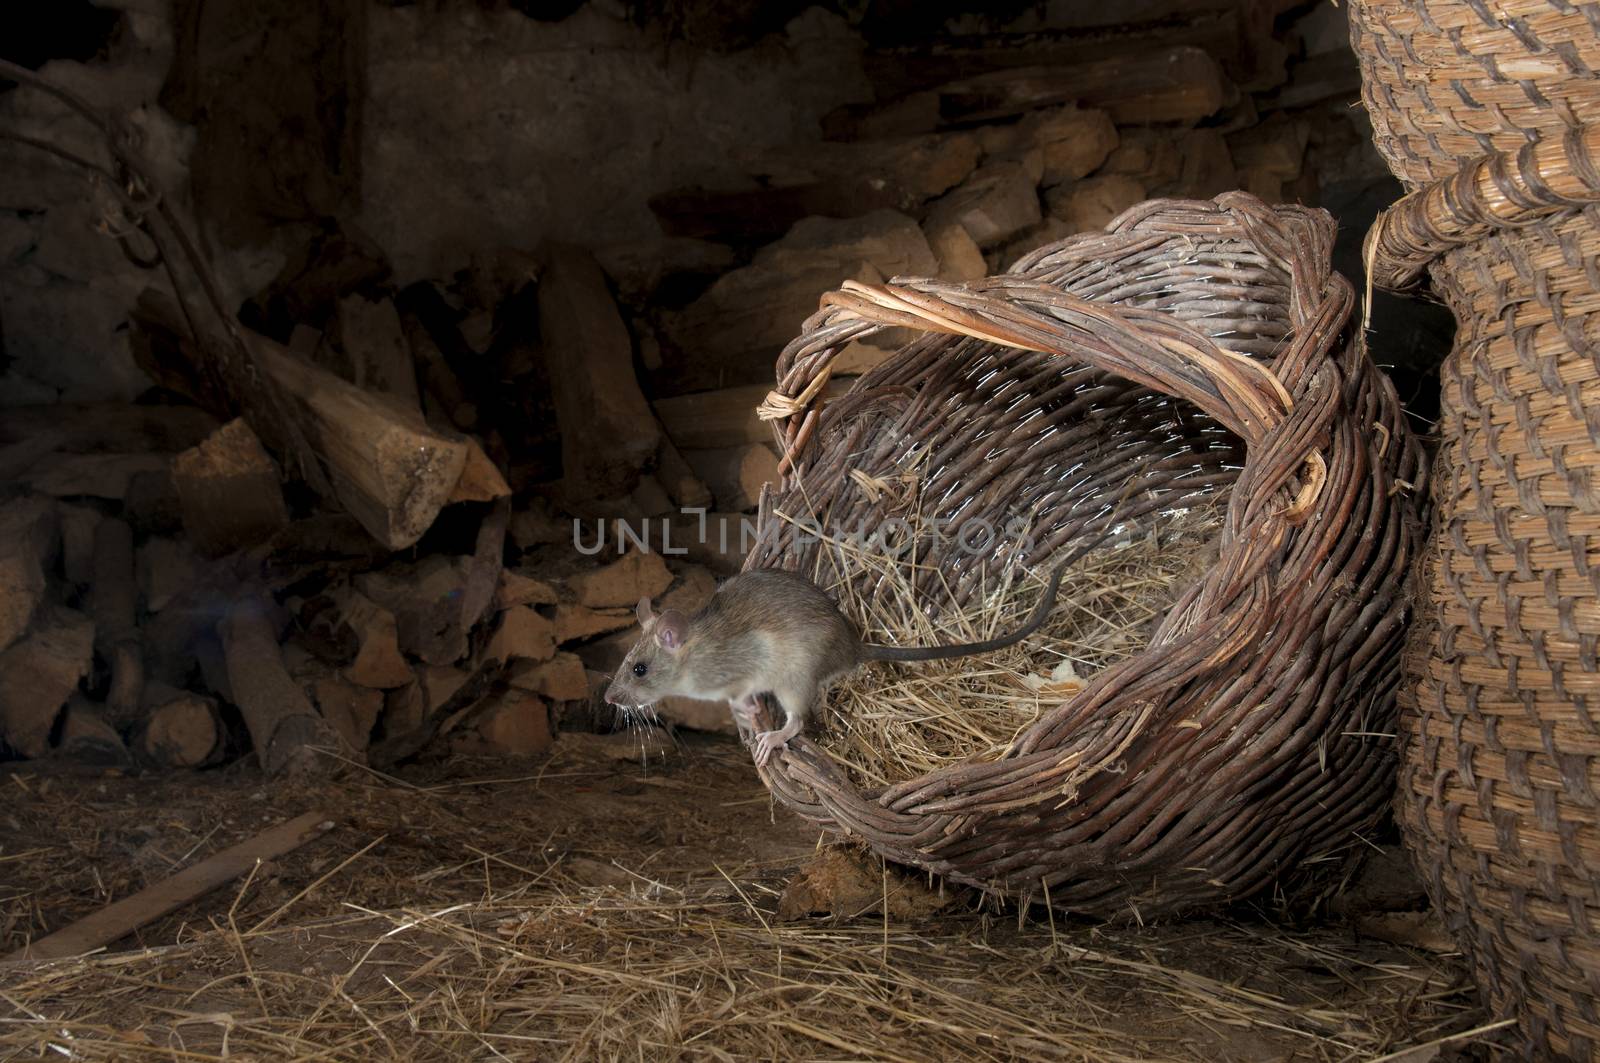 Black Rat or vole looking for food in an old barn, Rattus rattus, Spain